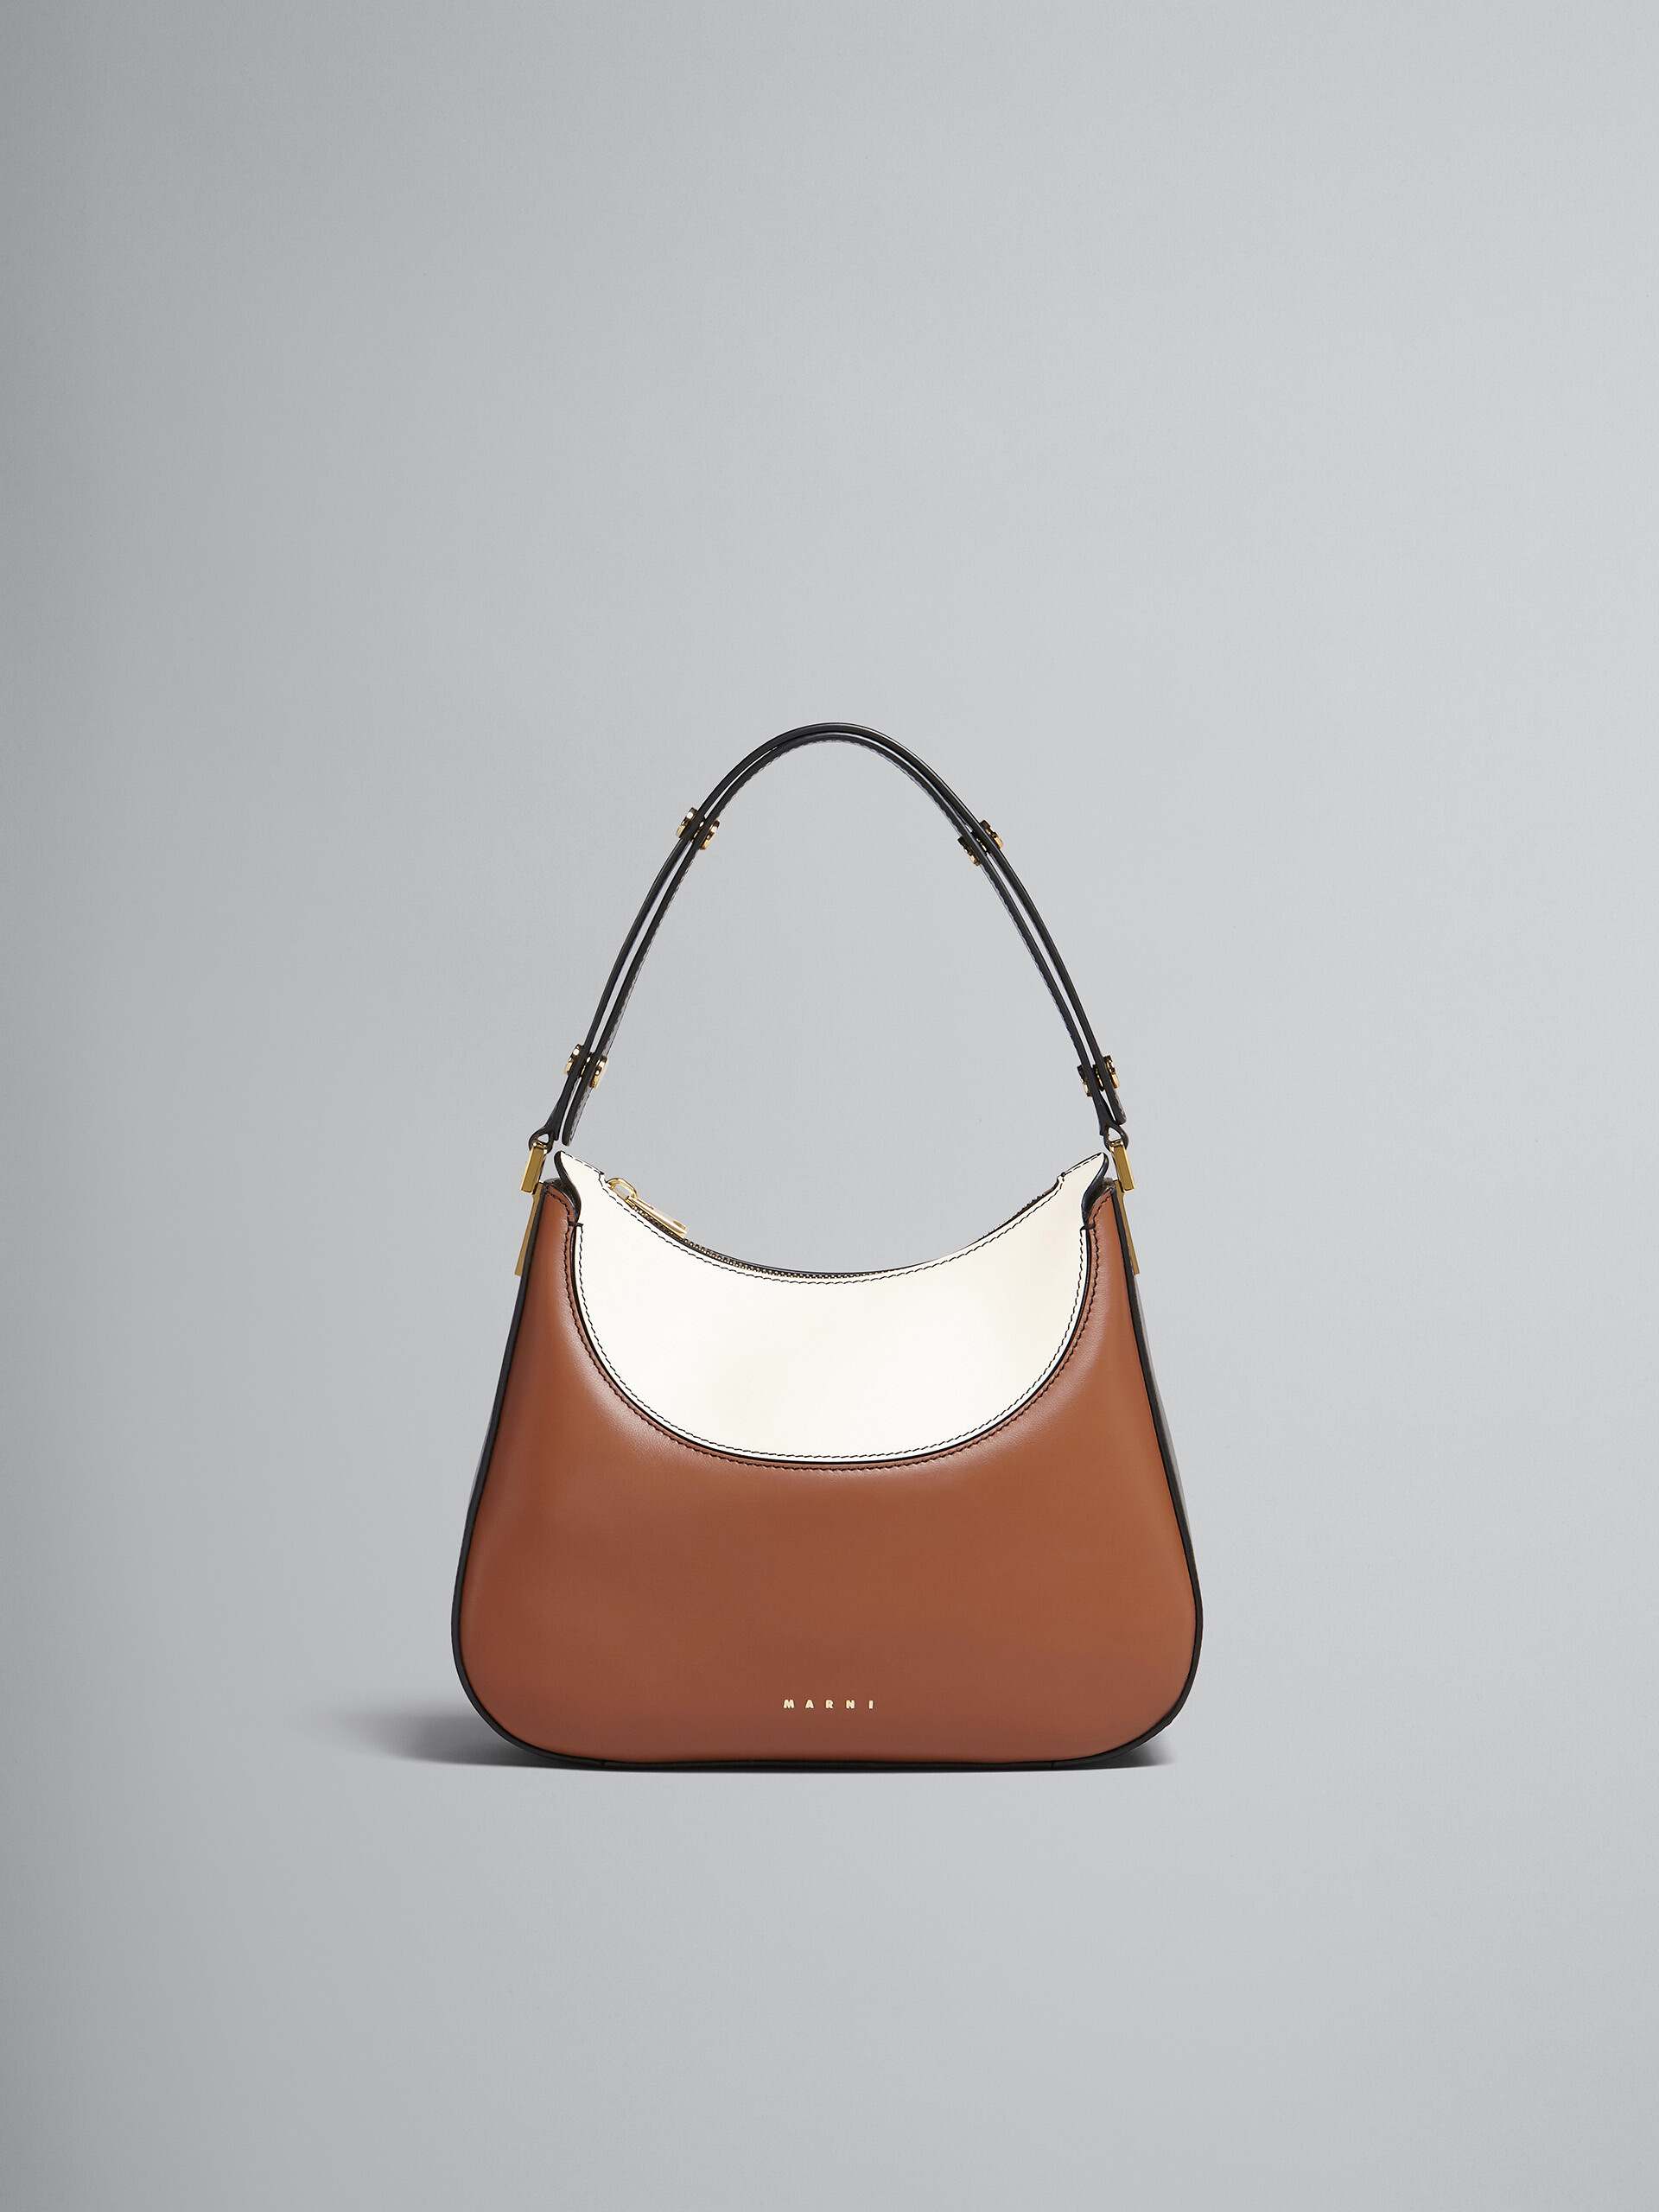 Milano small bag in brown black and white - Handbags - Image 1